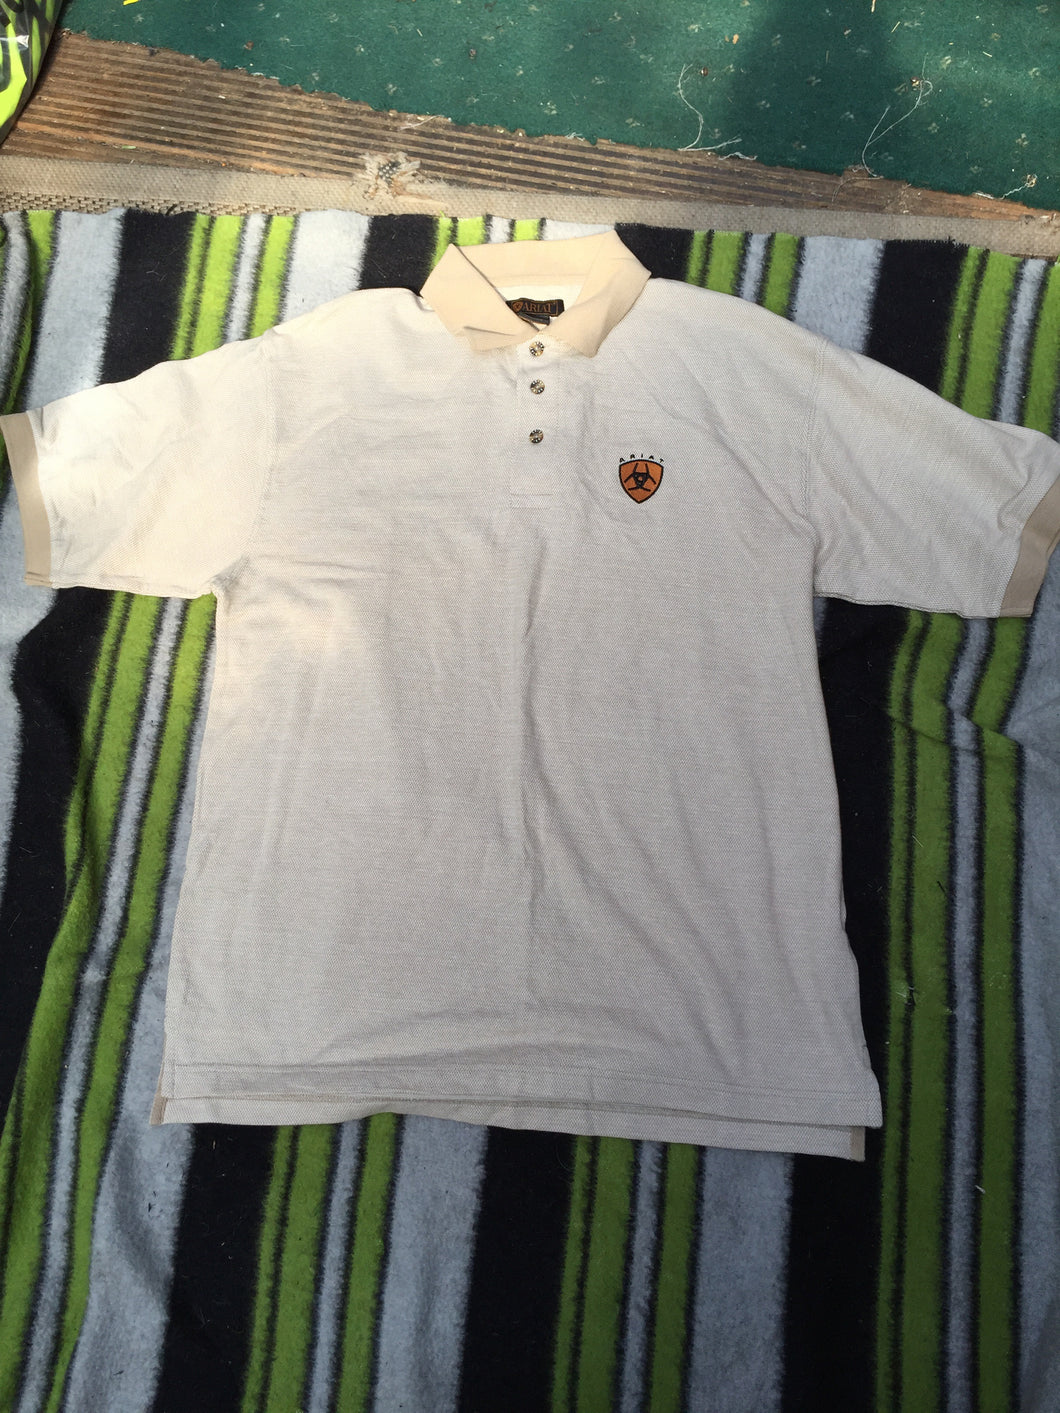 Ariat cream checked  short sleeved polo t-shirt size L (16/18)FREE POSTAGE